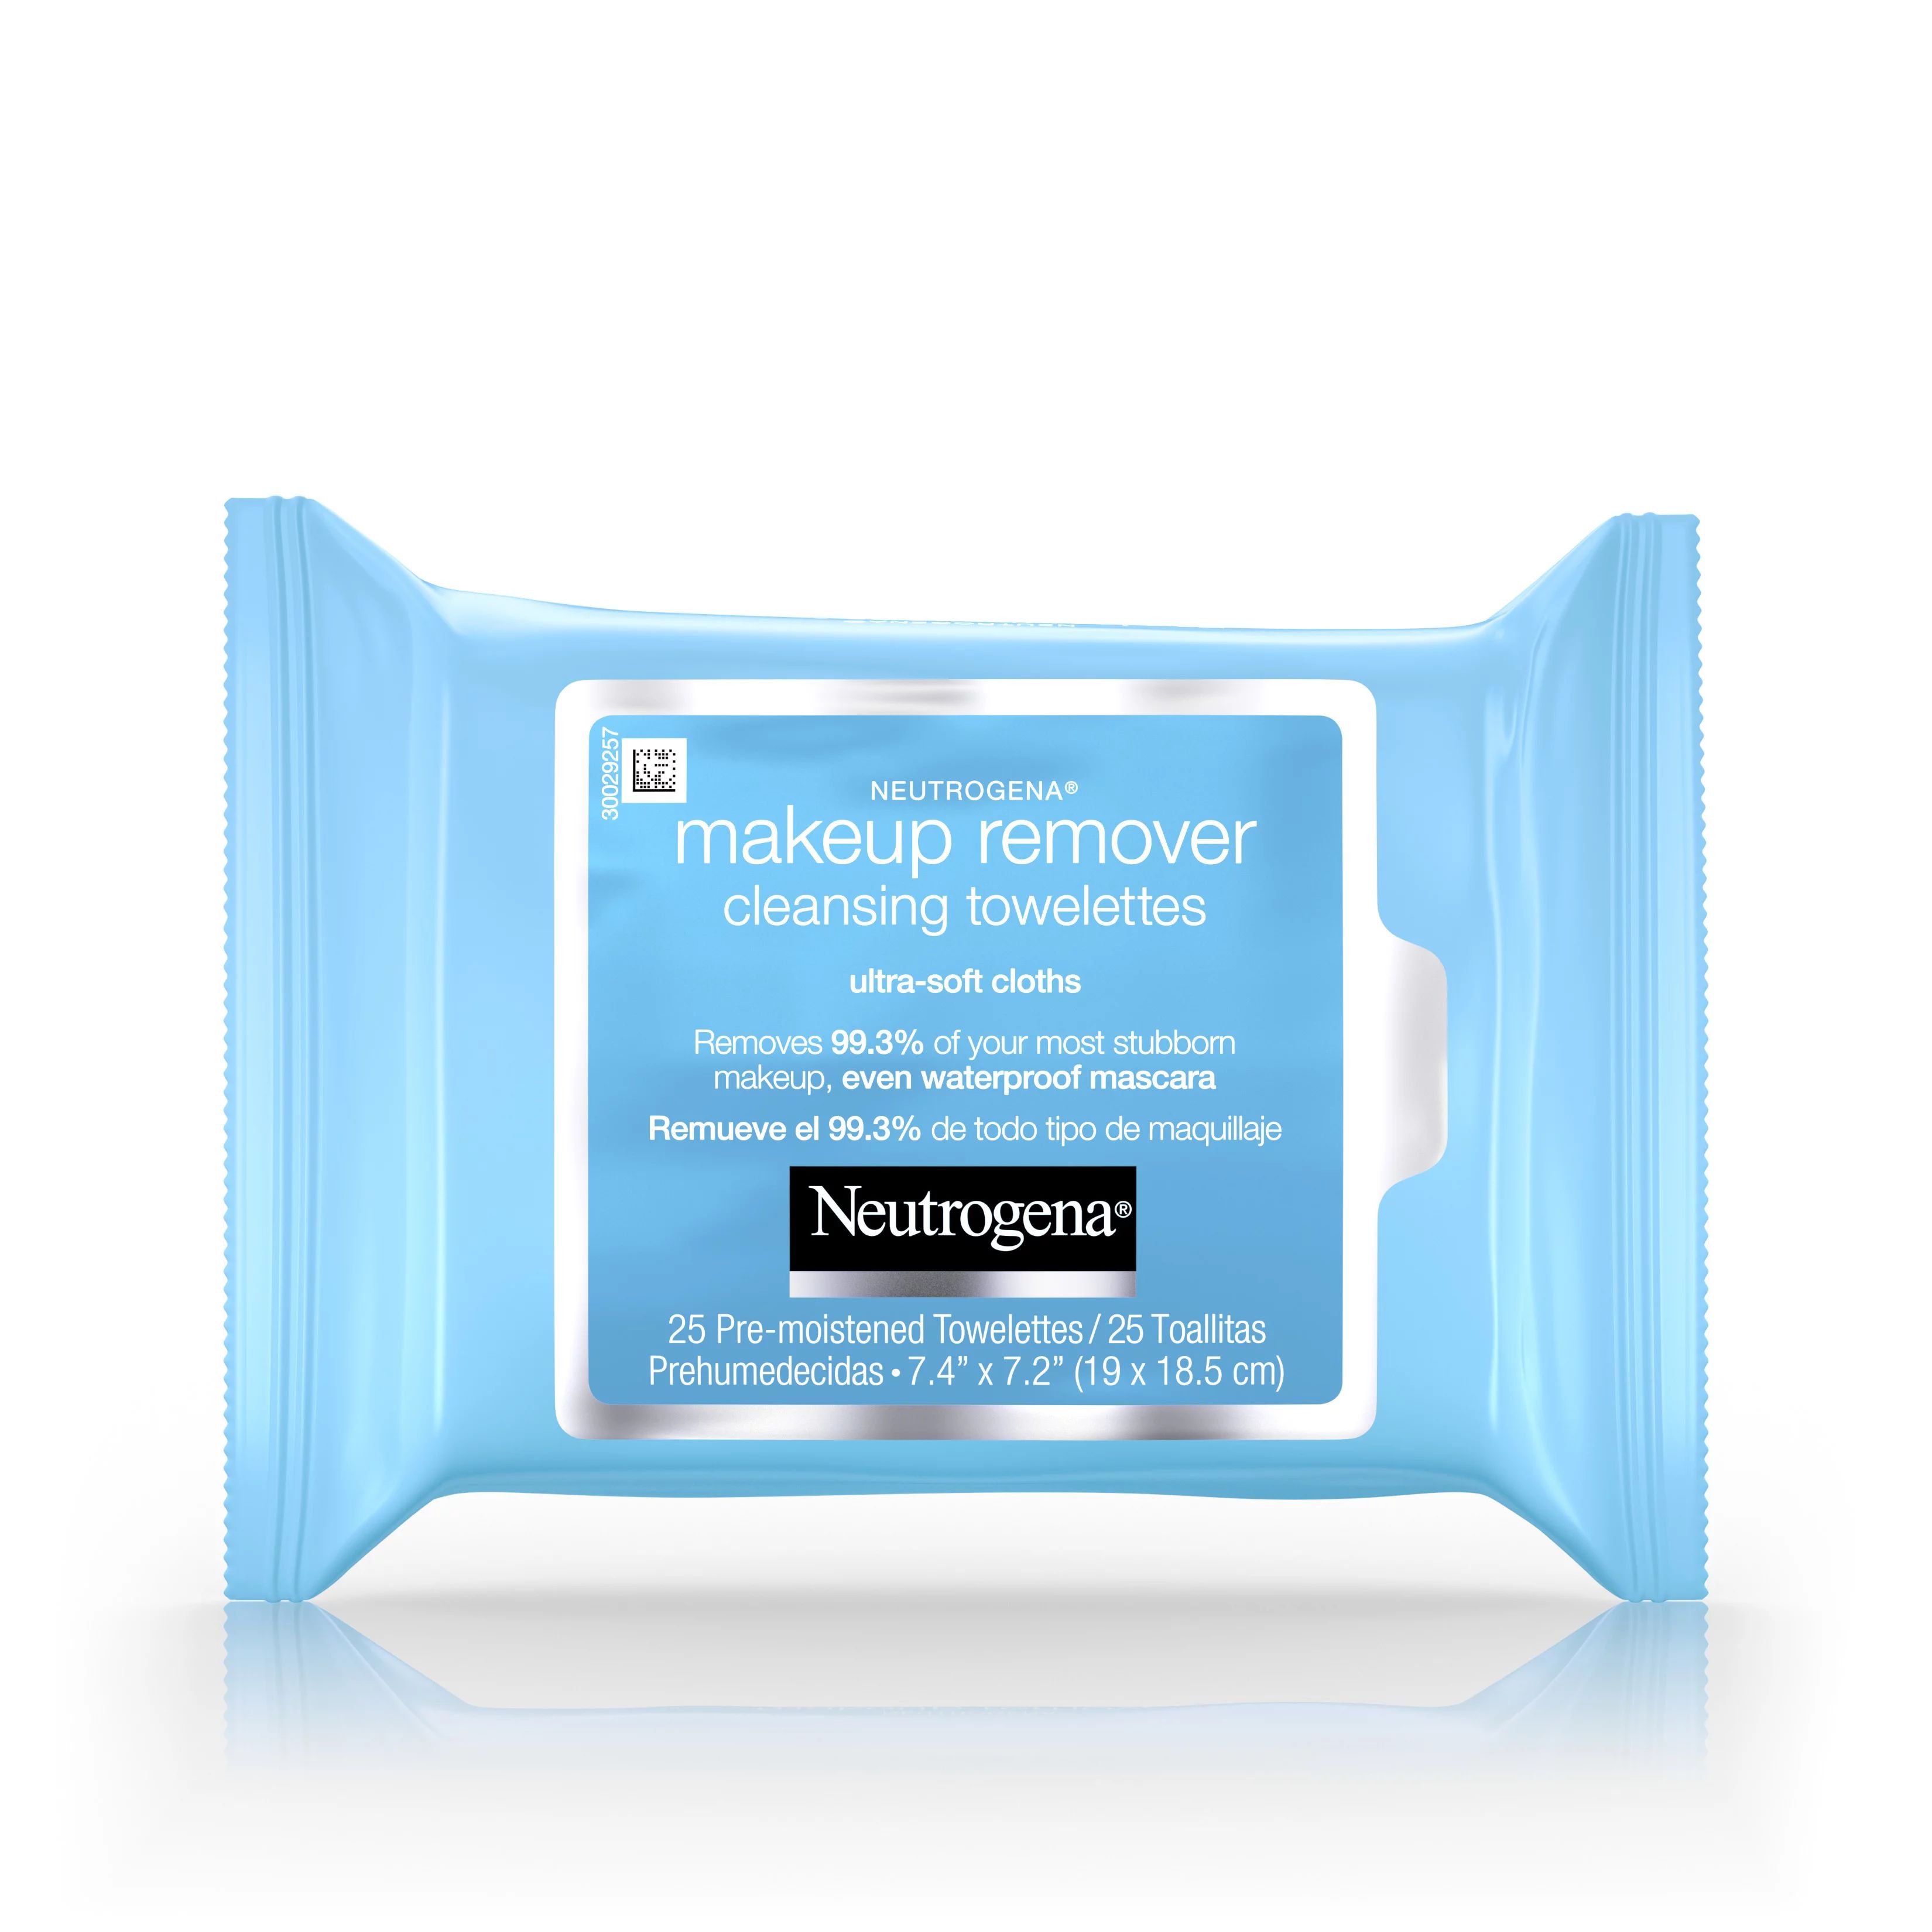 Neutrogena Cleansing Makeup Remover Facial Wipes, 25 ct | Walmart (US)